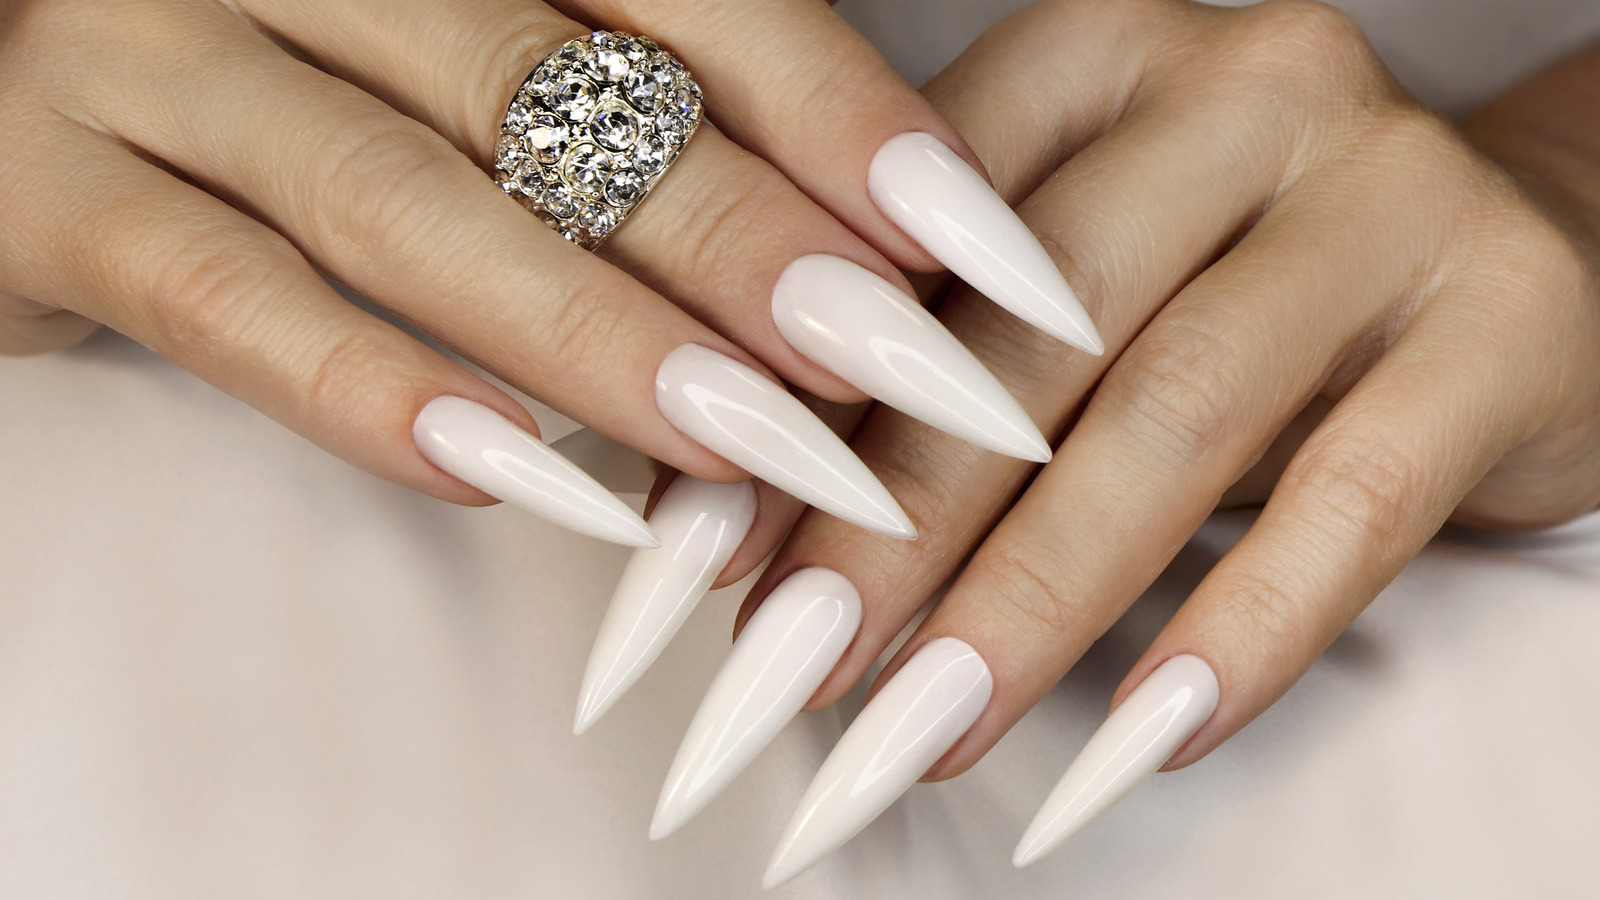 How To Remove Acrylic Nails Without Causing Damage